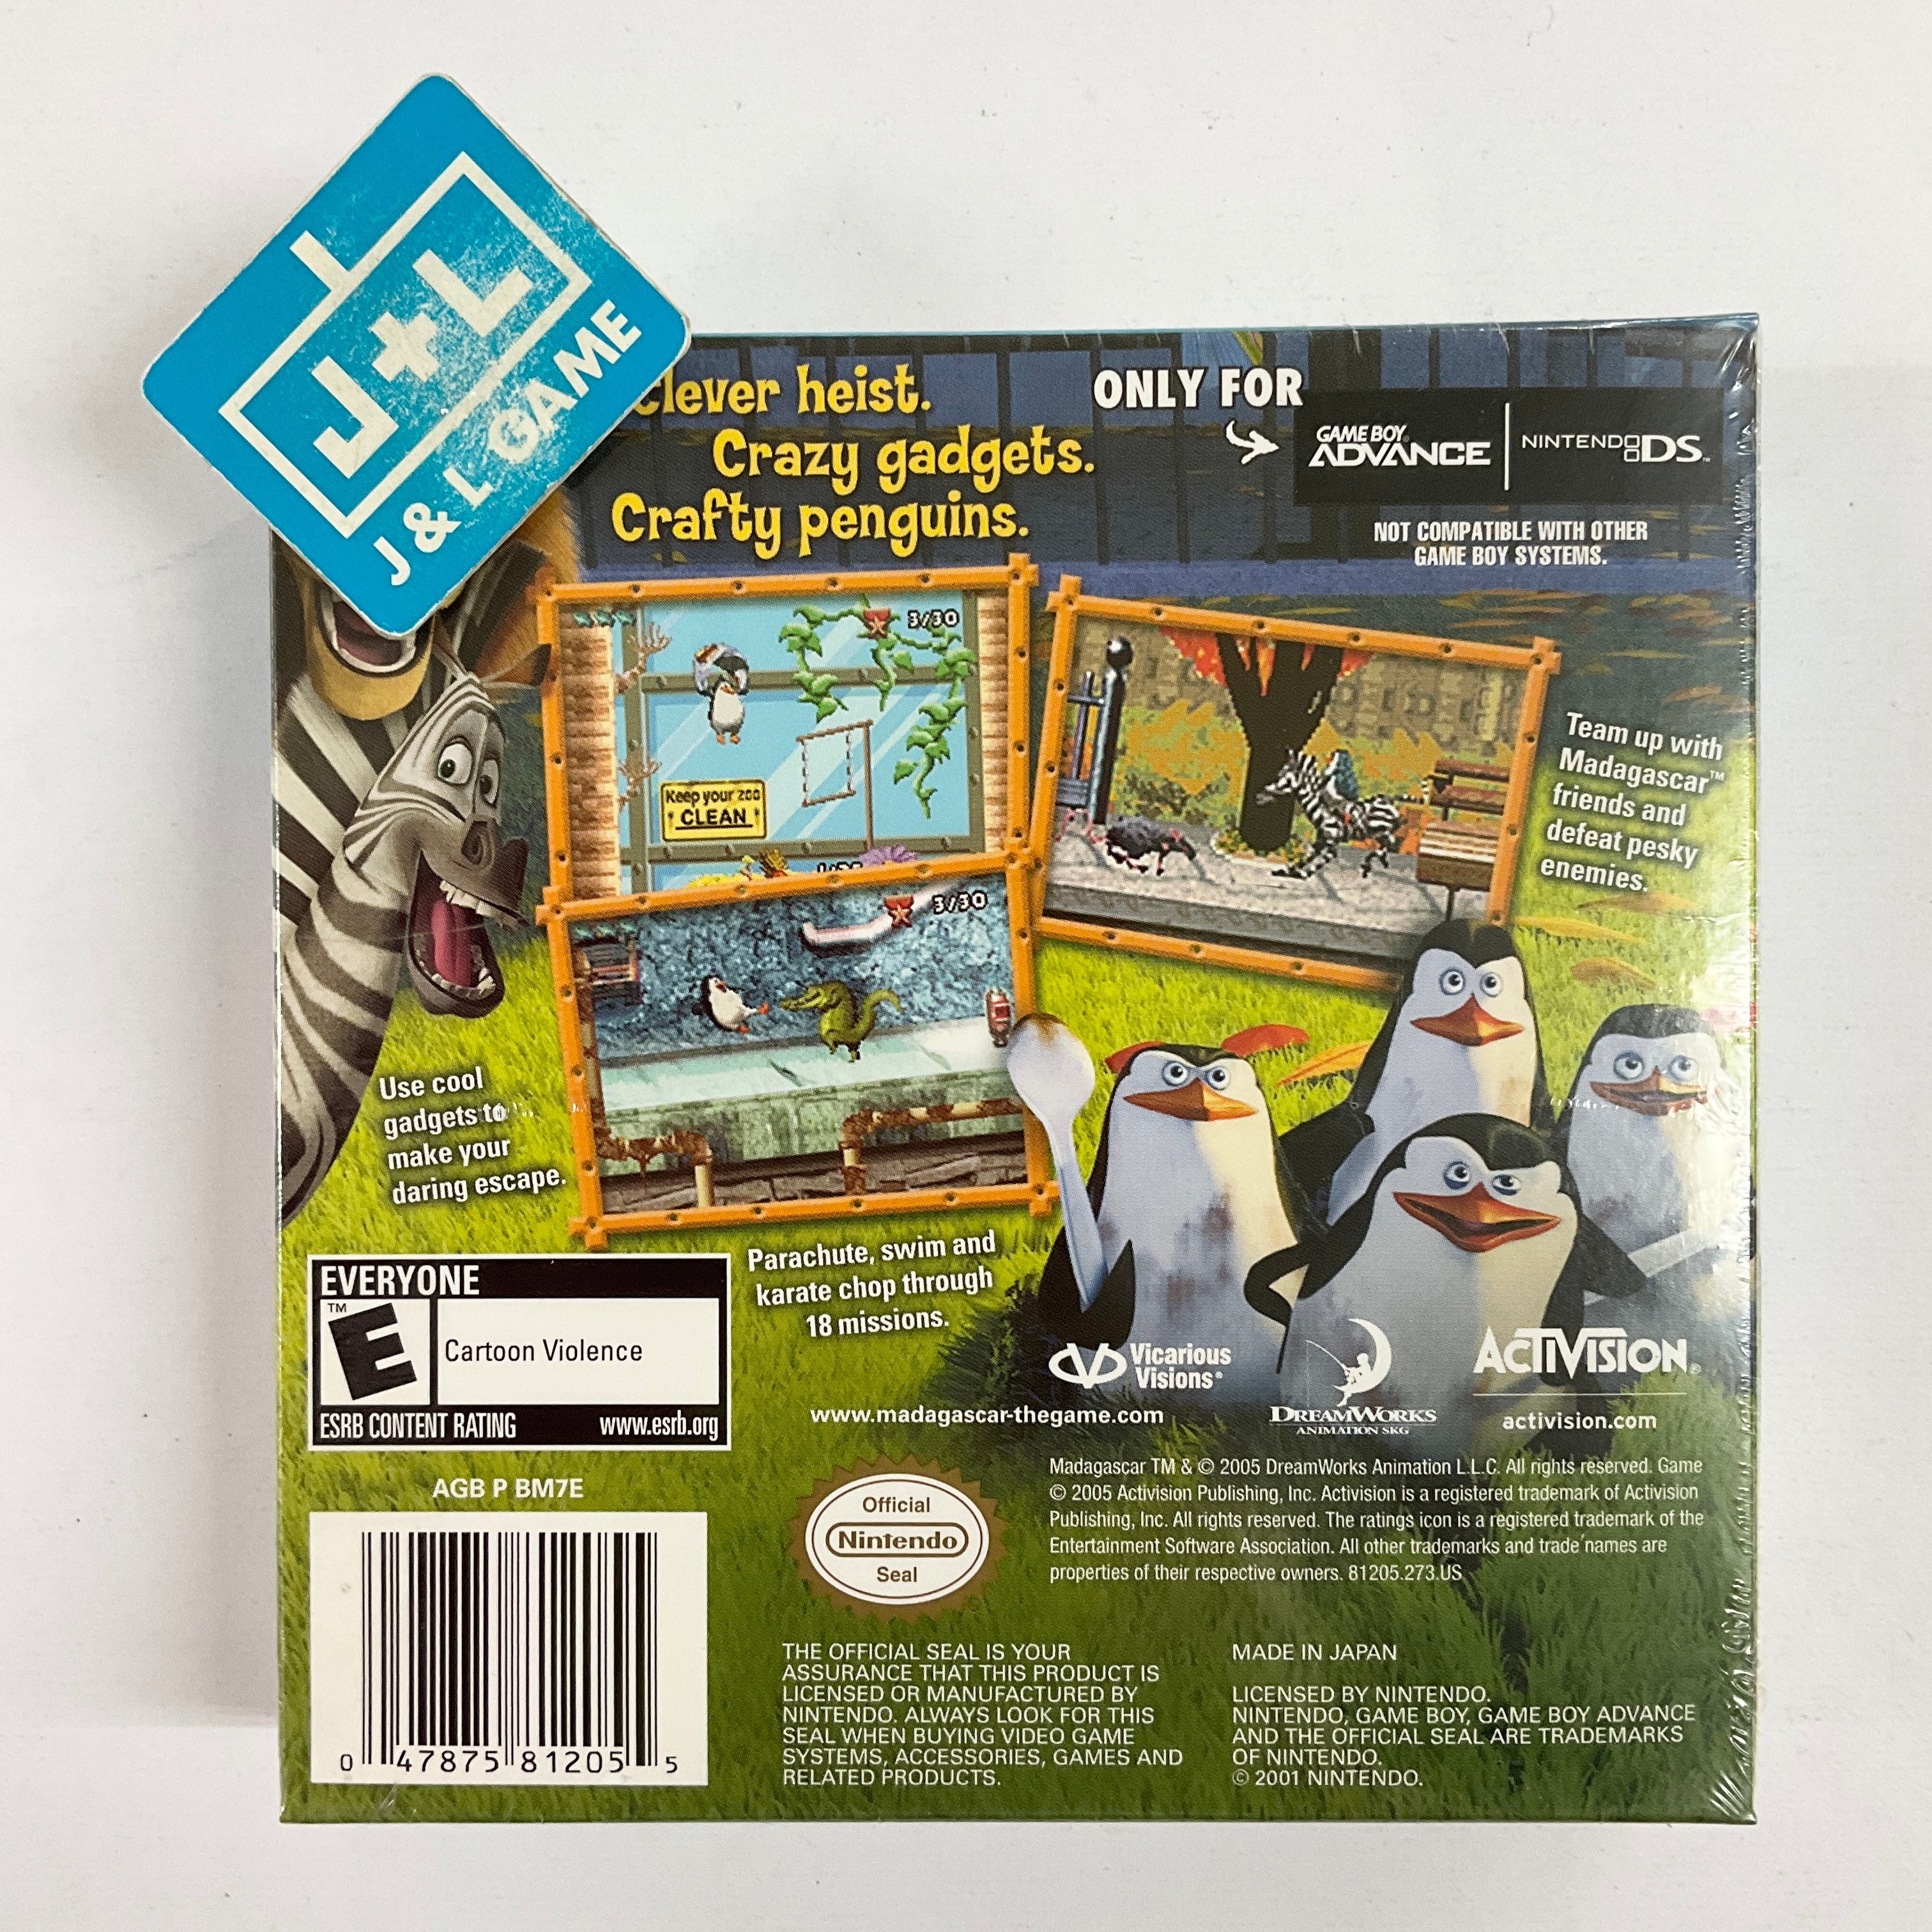 Dreamworks Madagascar: Operation Penguin - (GBA) Game Boy Advance Video Games Activision   